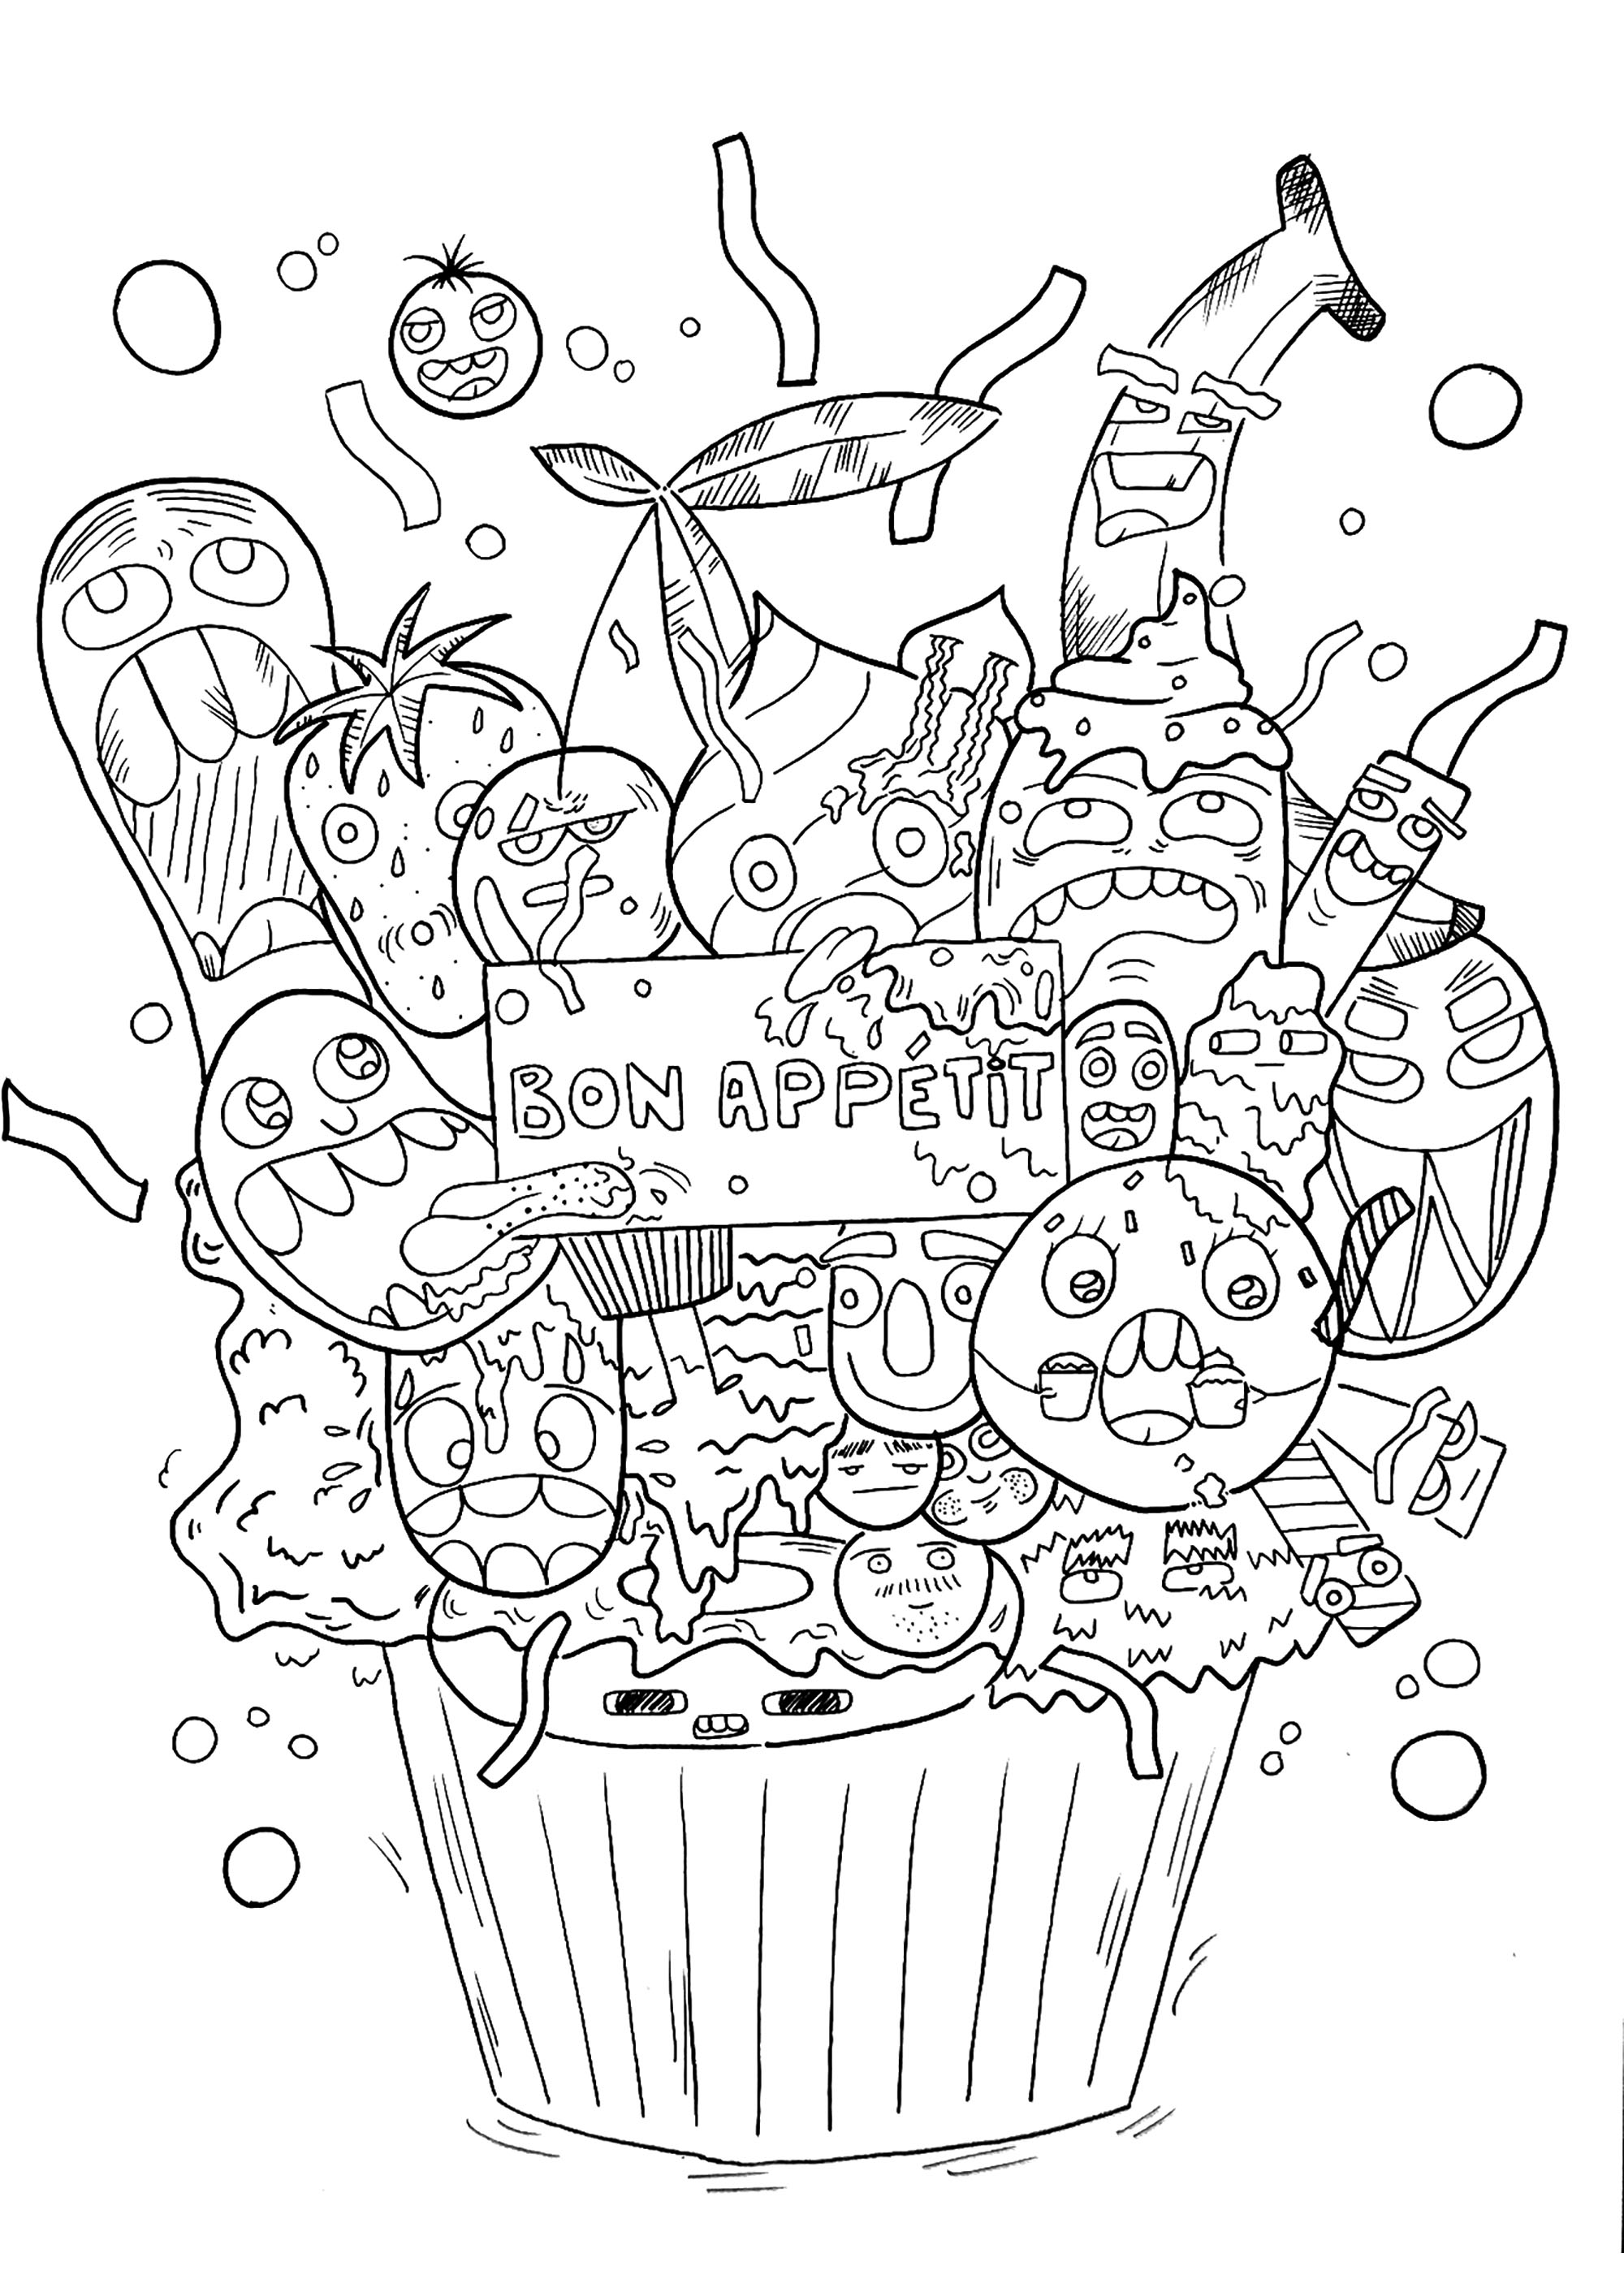 Doodle cupcake - Doodle Art / Doodling Adult Coloring Pages